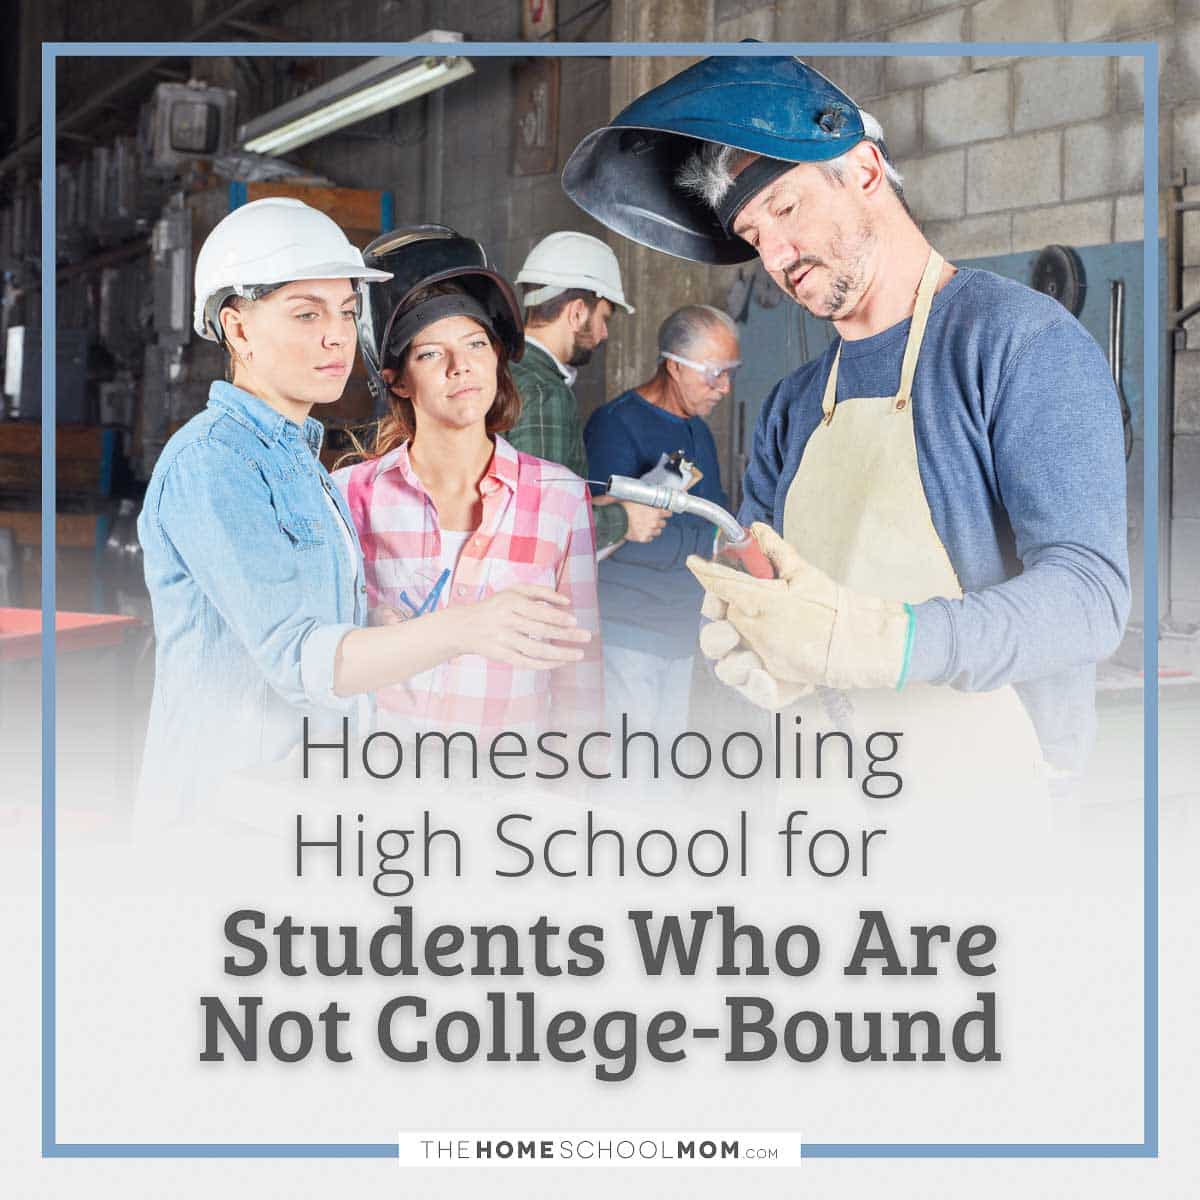 Homeschooling high school for students who are not college-bound.